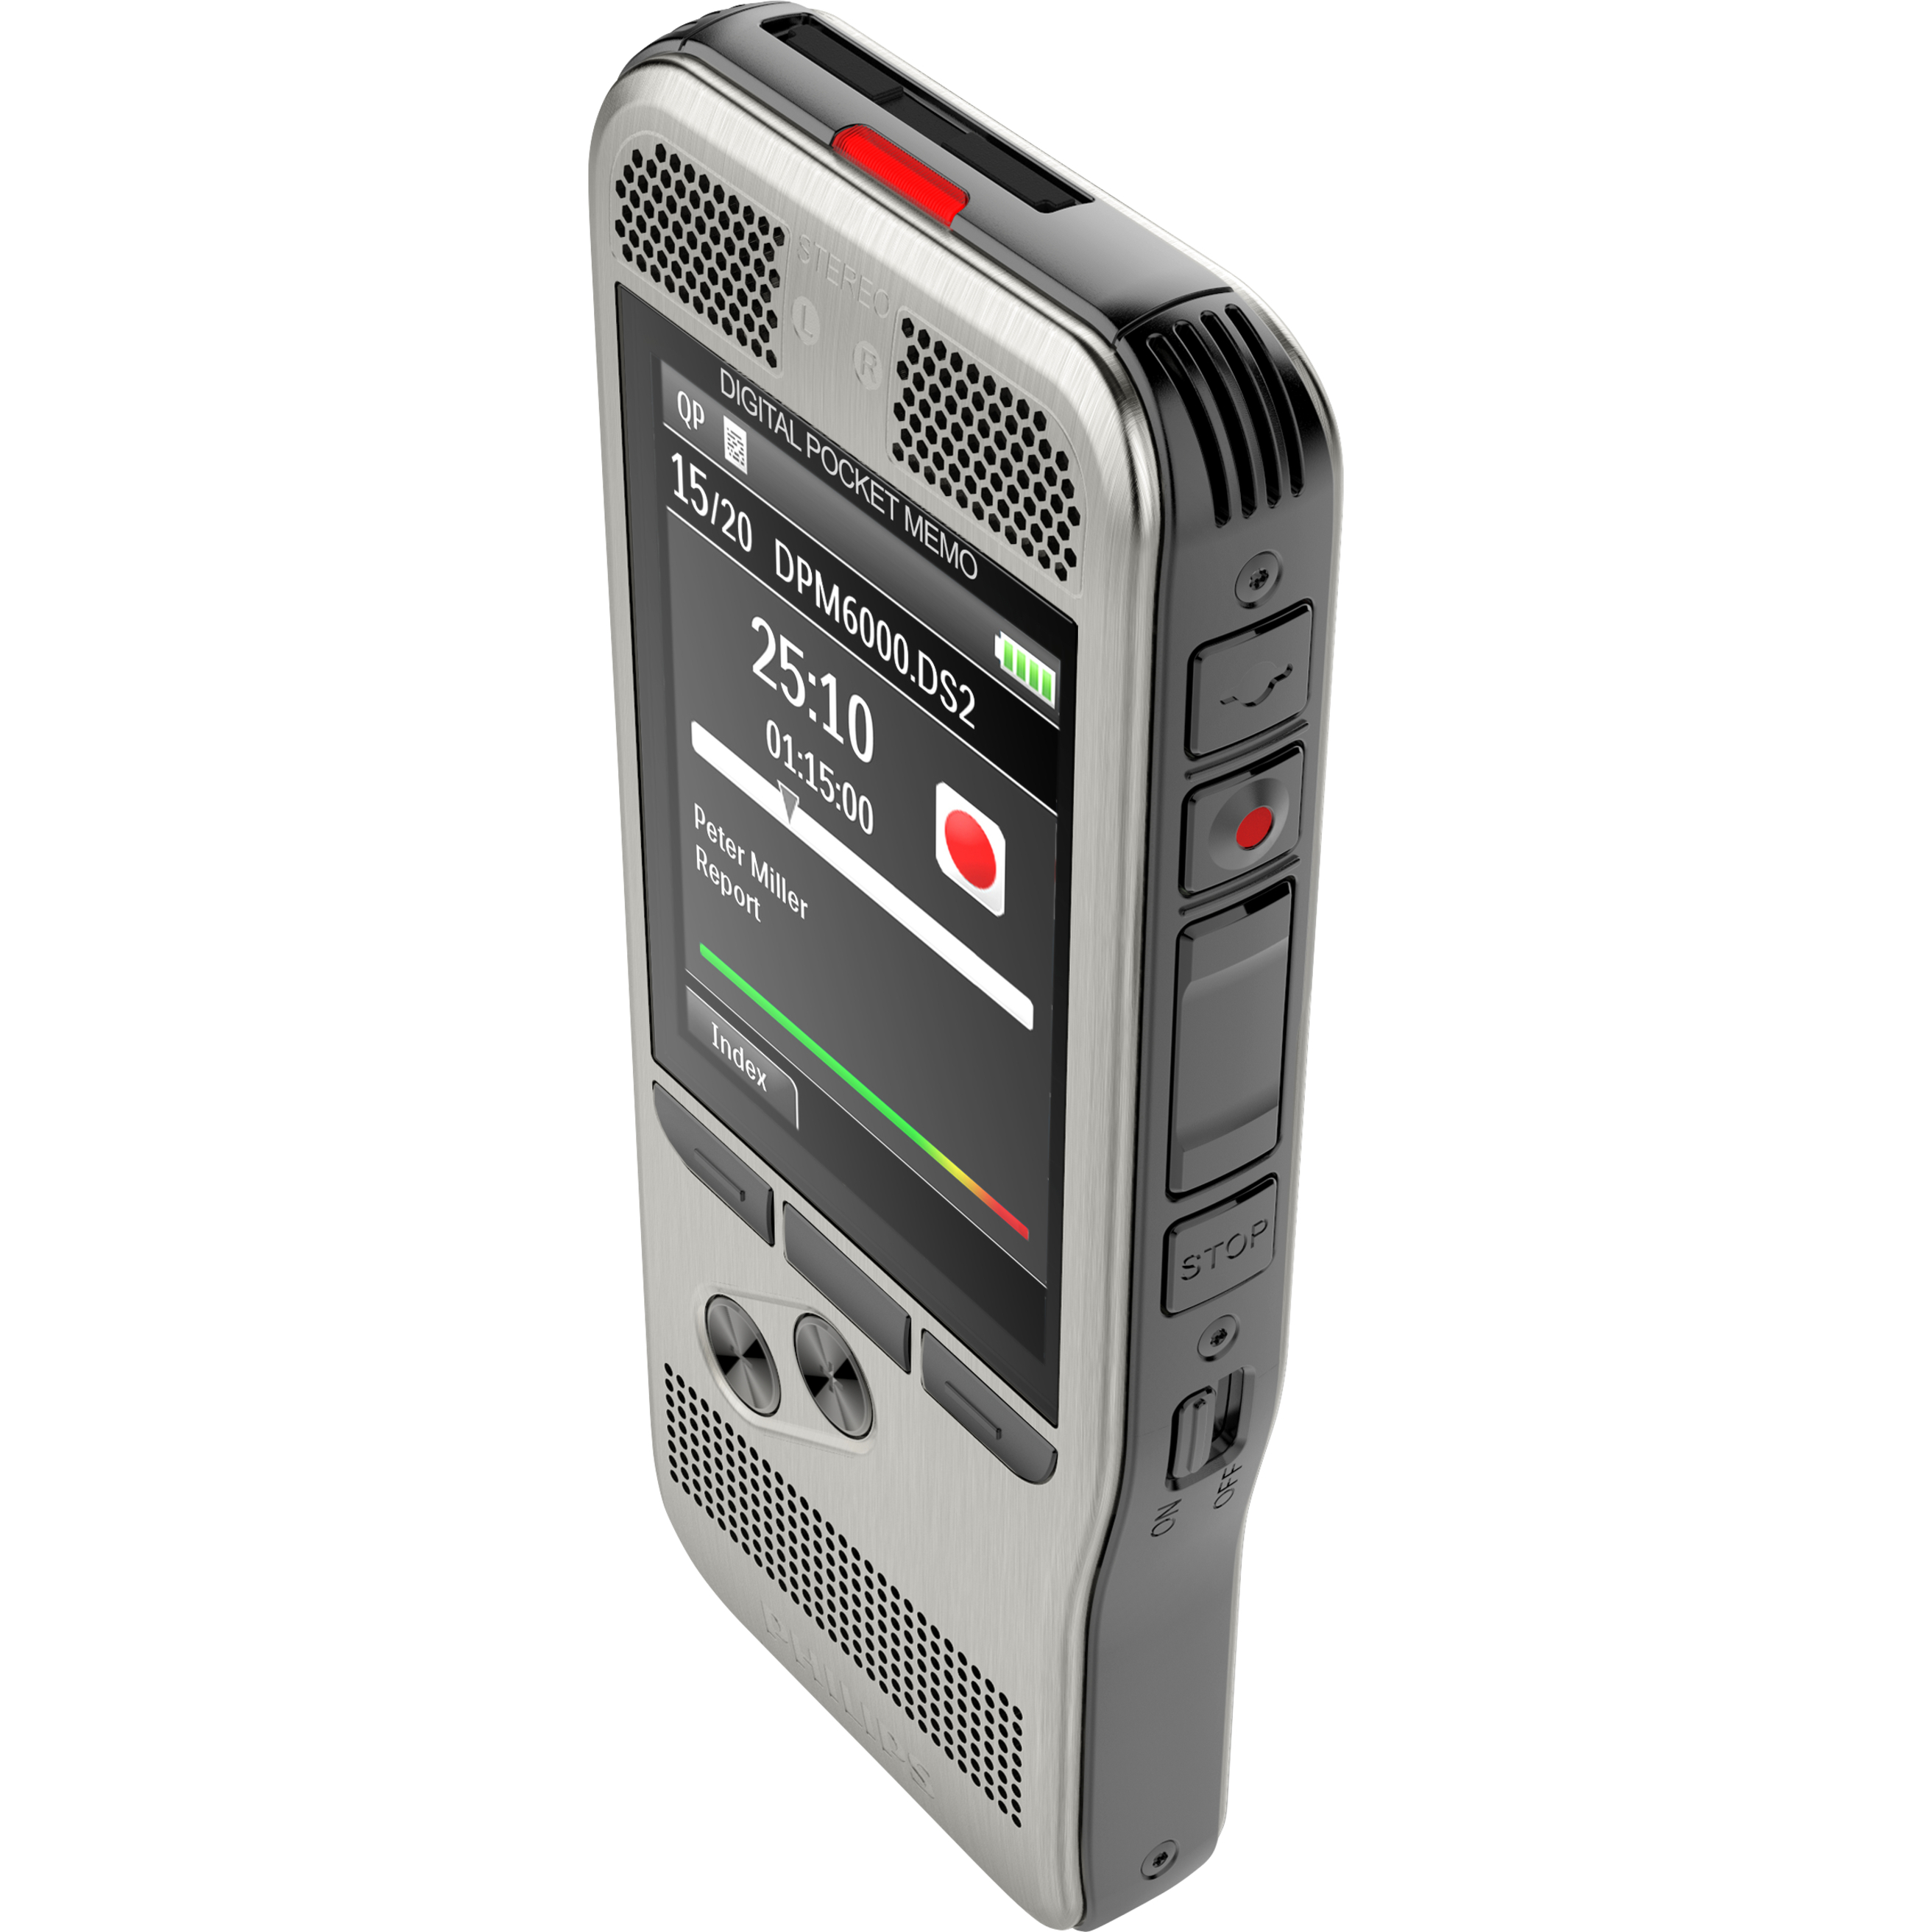 Philips Pocket Memo Digital Voice Recorder with LCD Display, DPM6000 - image 2 of 7